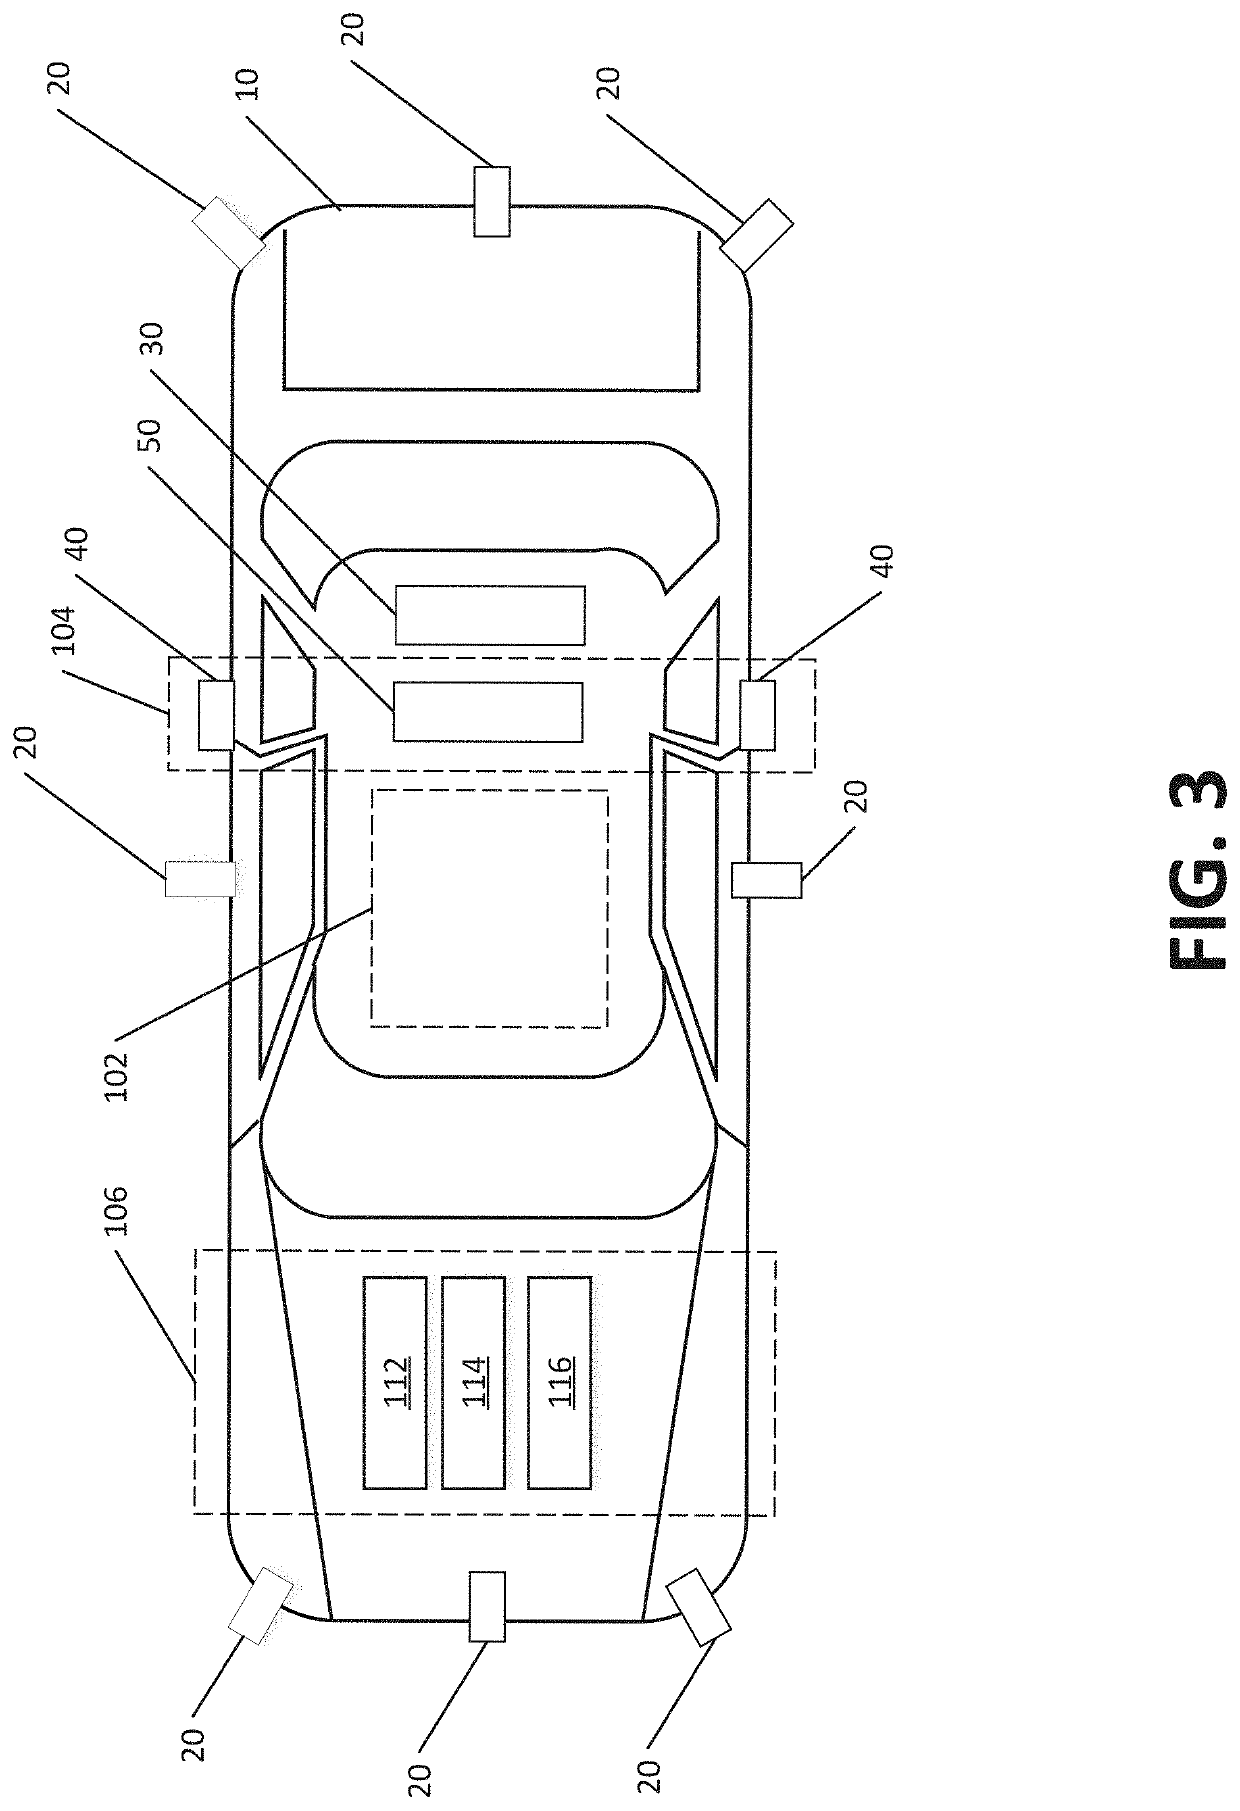 Automated lane change system and methods